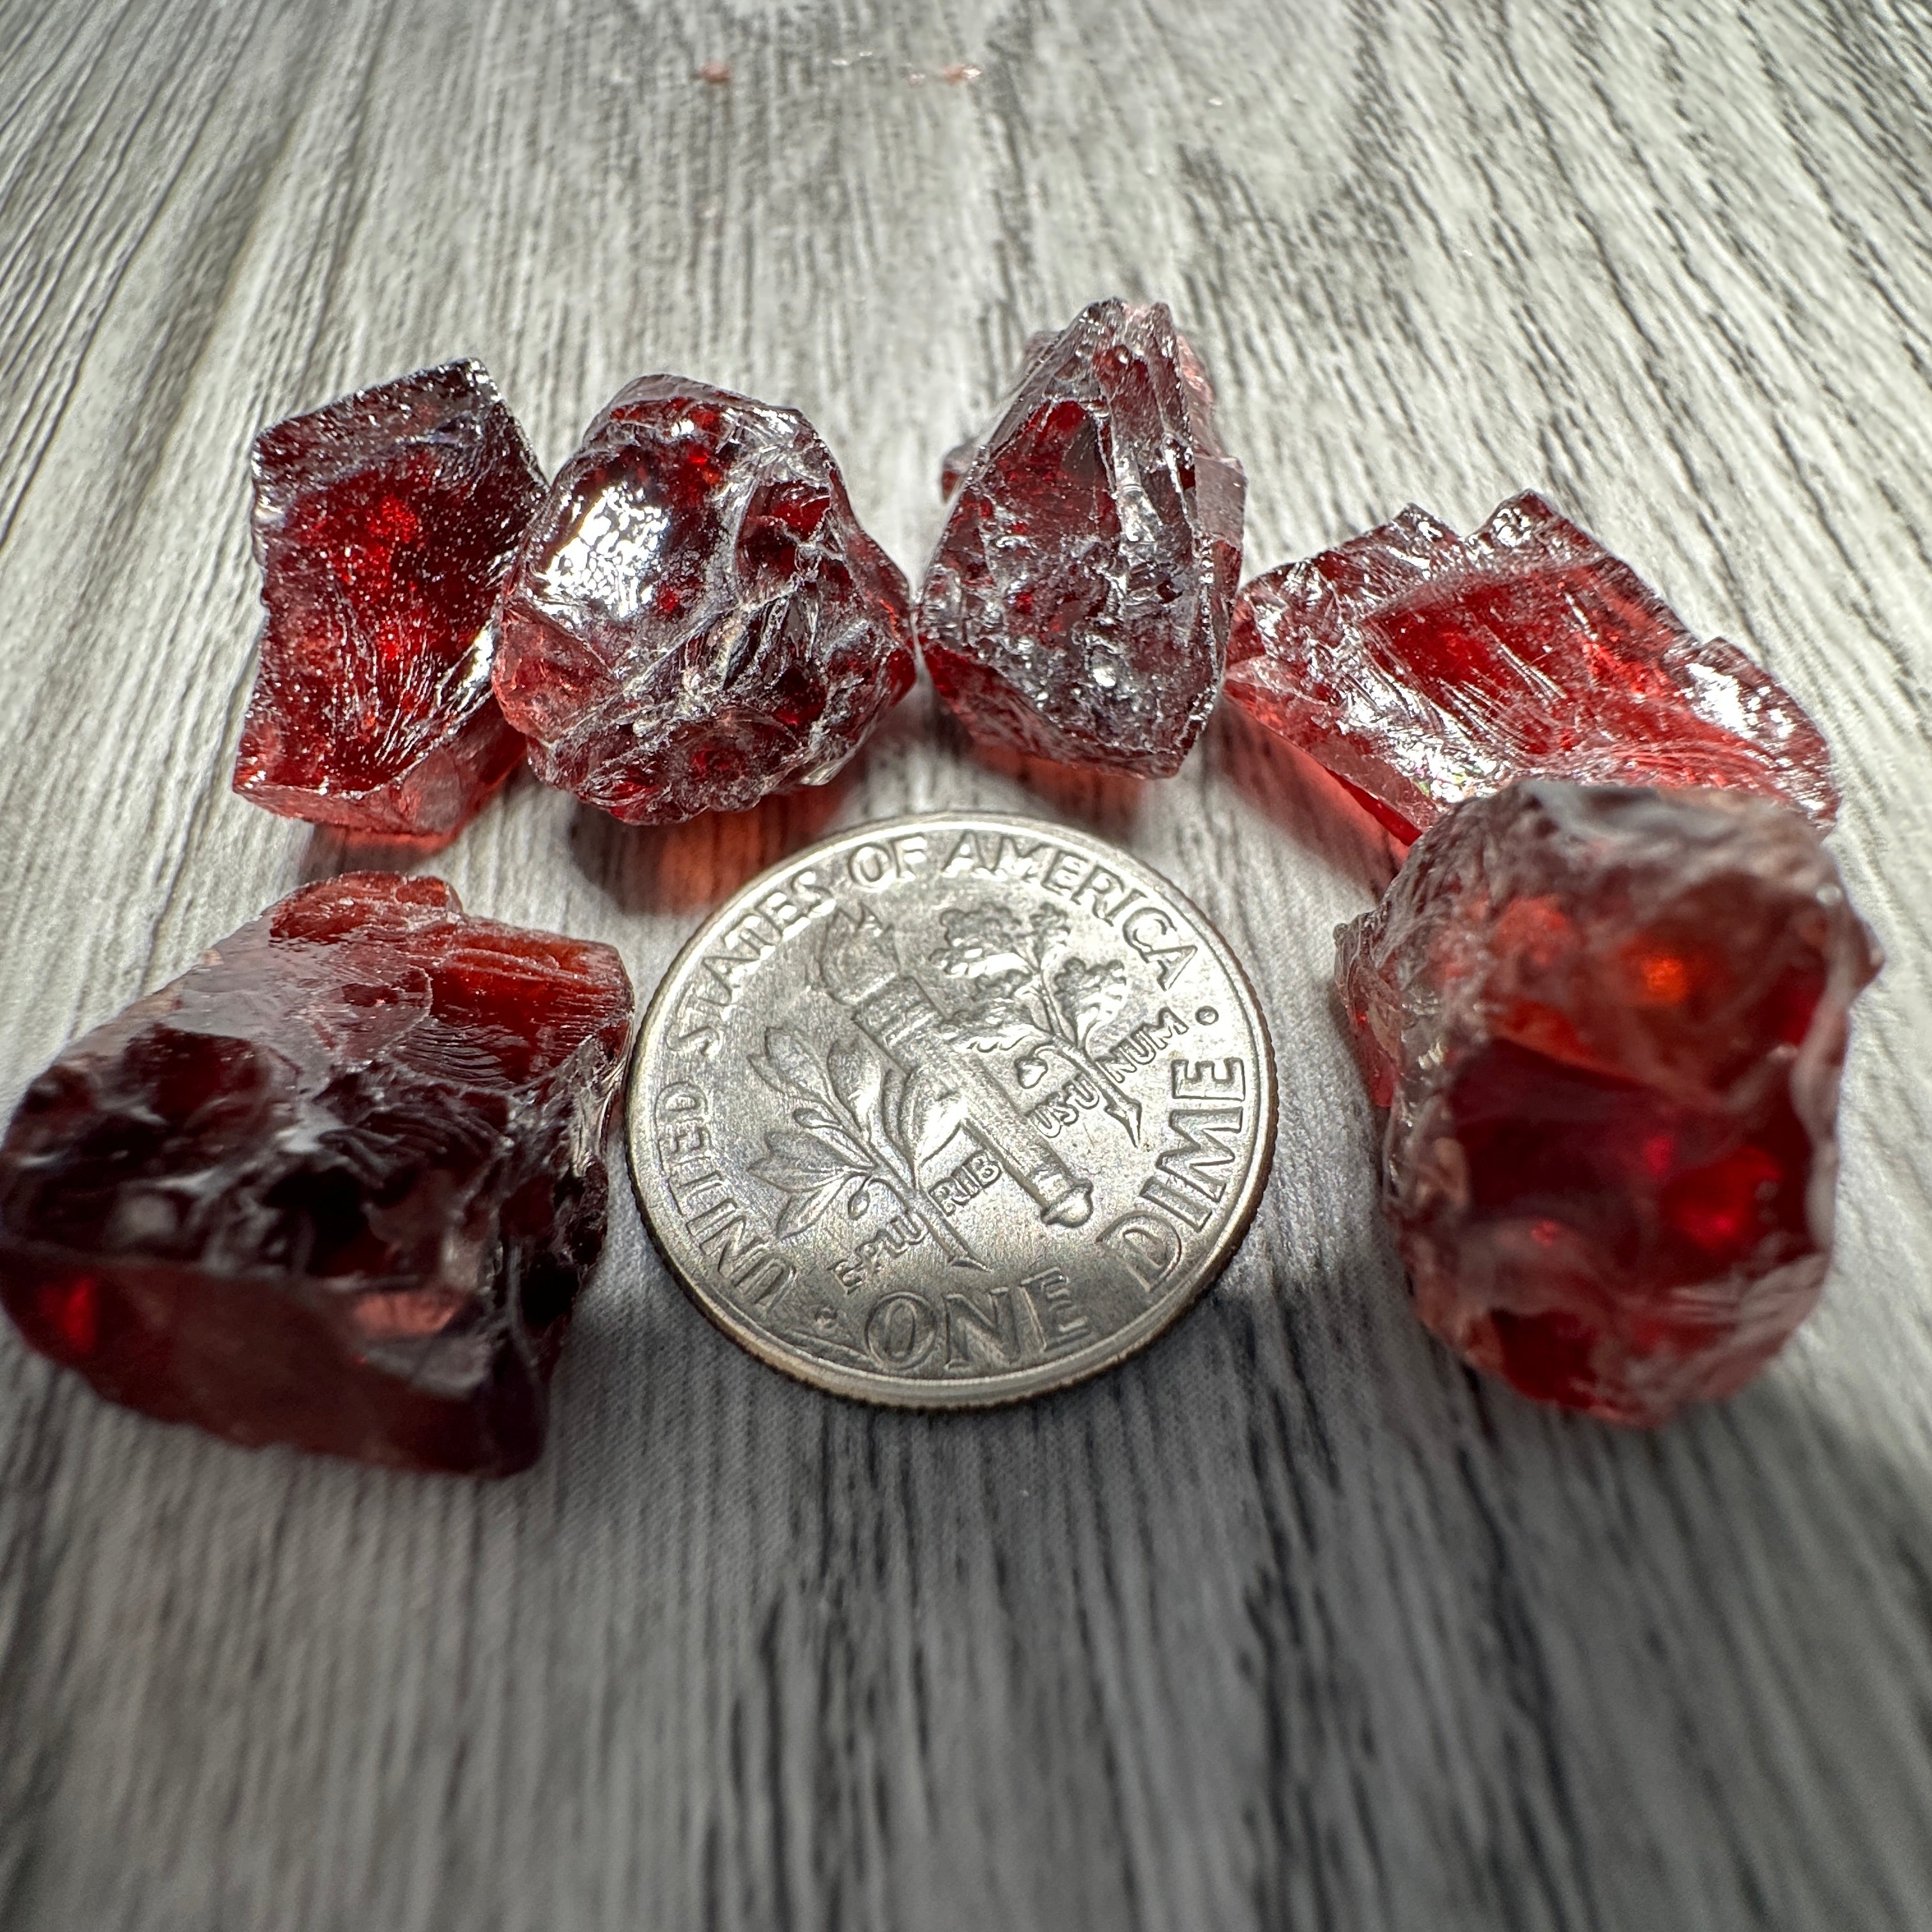 86.12ct Red Garnet Lot, 11.19ct - 16.13ct, clean with slight inclusions on the outside, Untreated Unheated